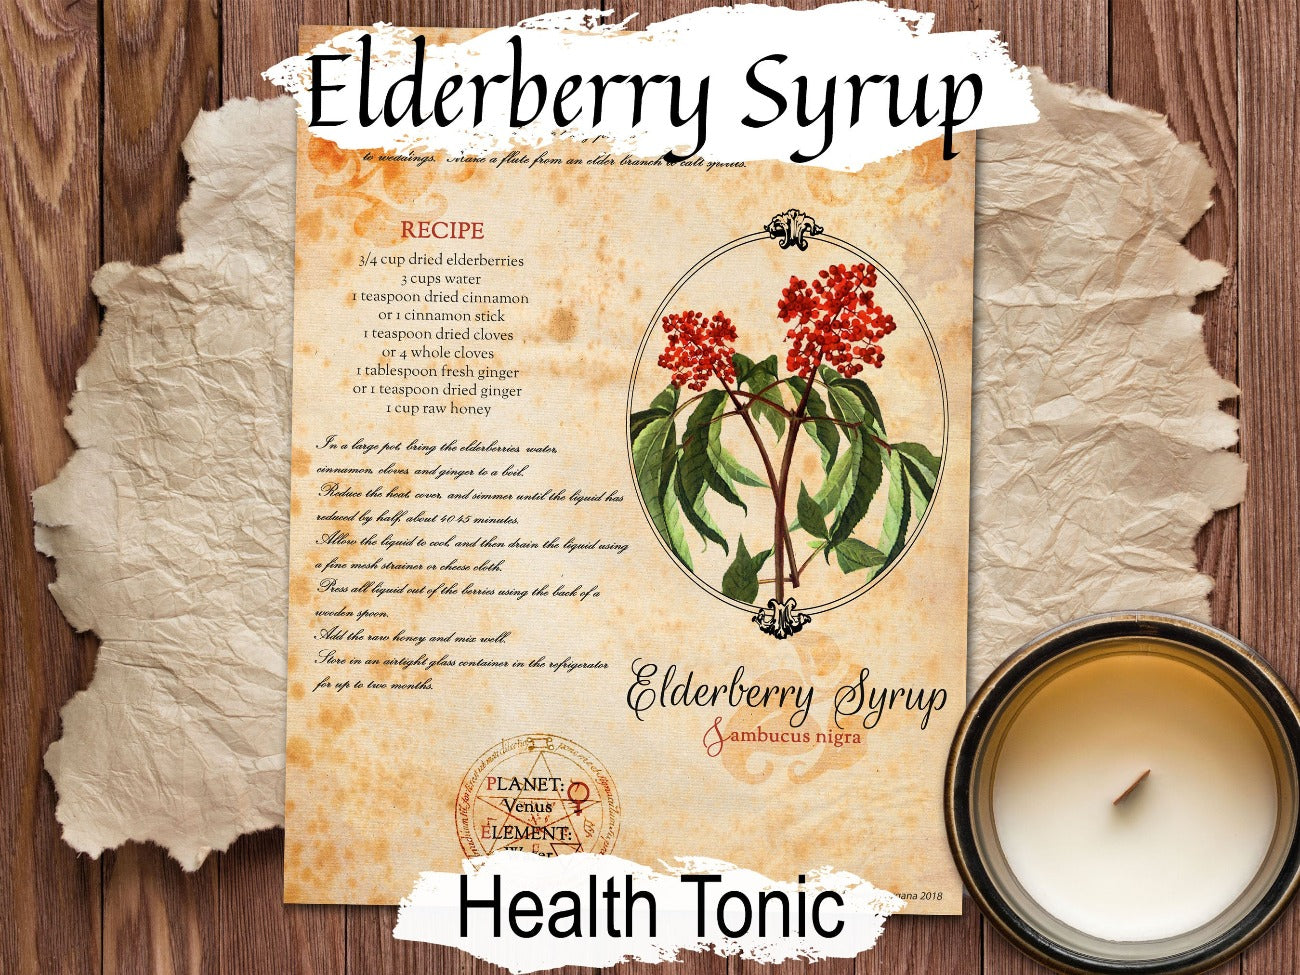 ELDERBERRY SYRUP RECIPE, Kitchen Witch Herbal Home Remedy, Natural Health, Elderberry Magick, Elderberry Tonic, Immune Boosting Potion - Morgana Magick Spell